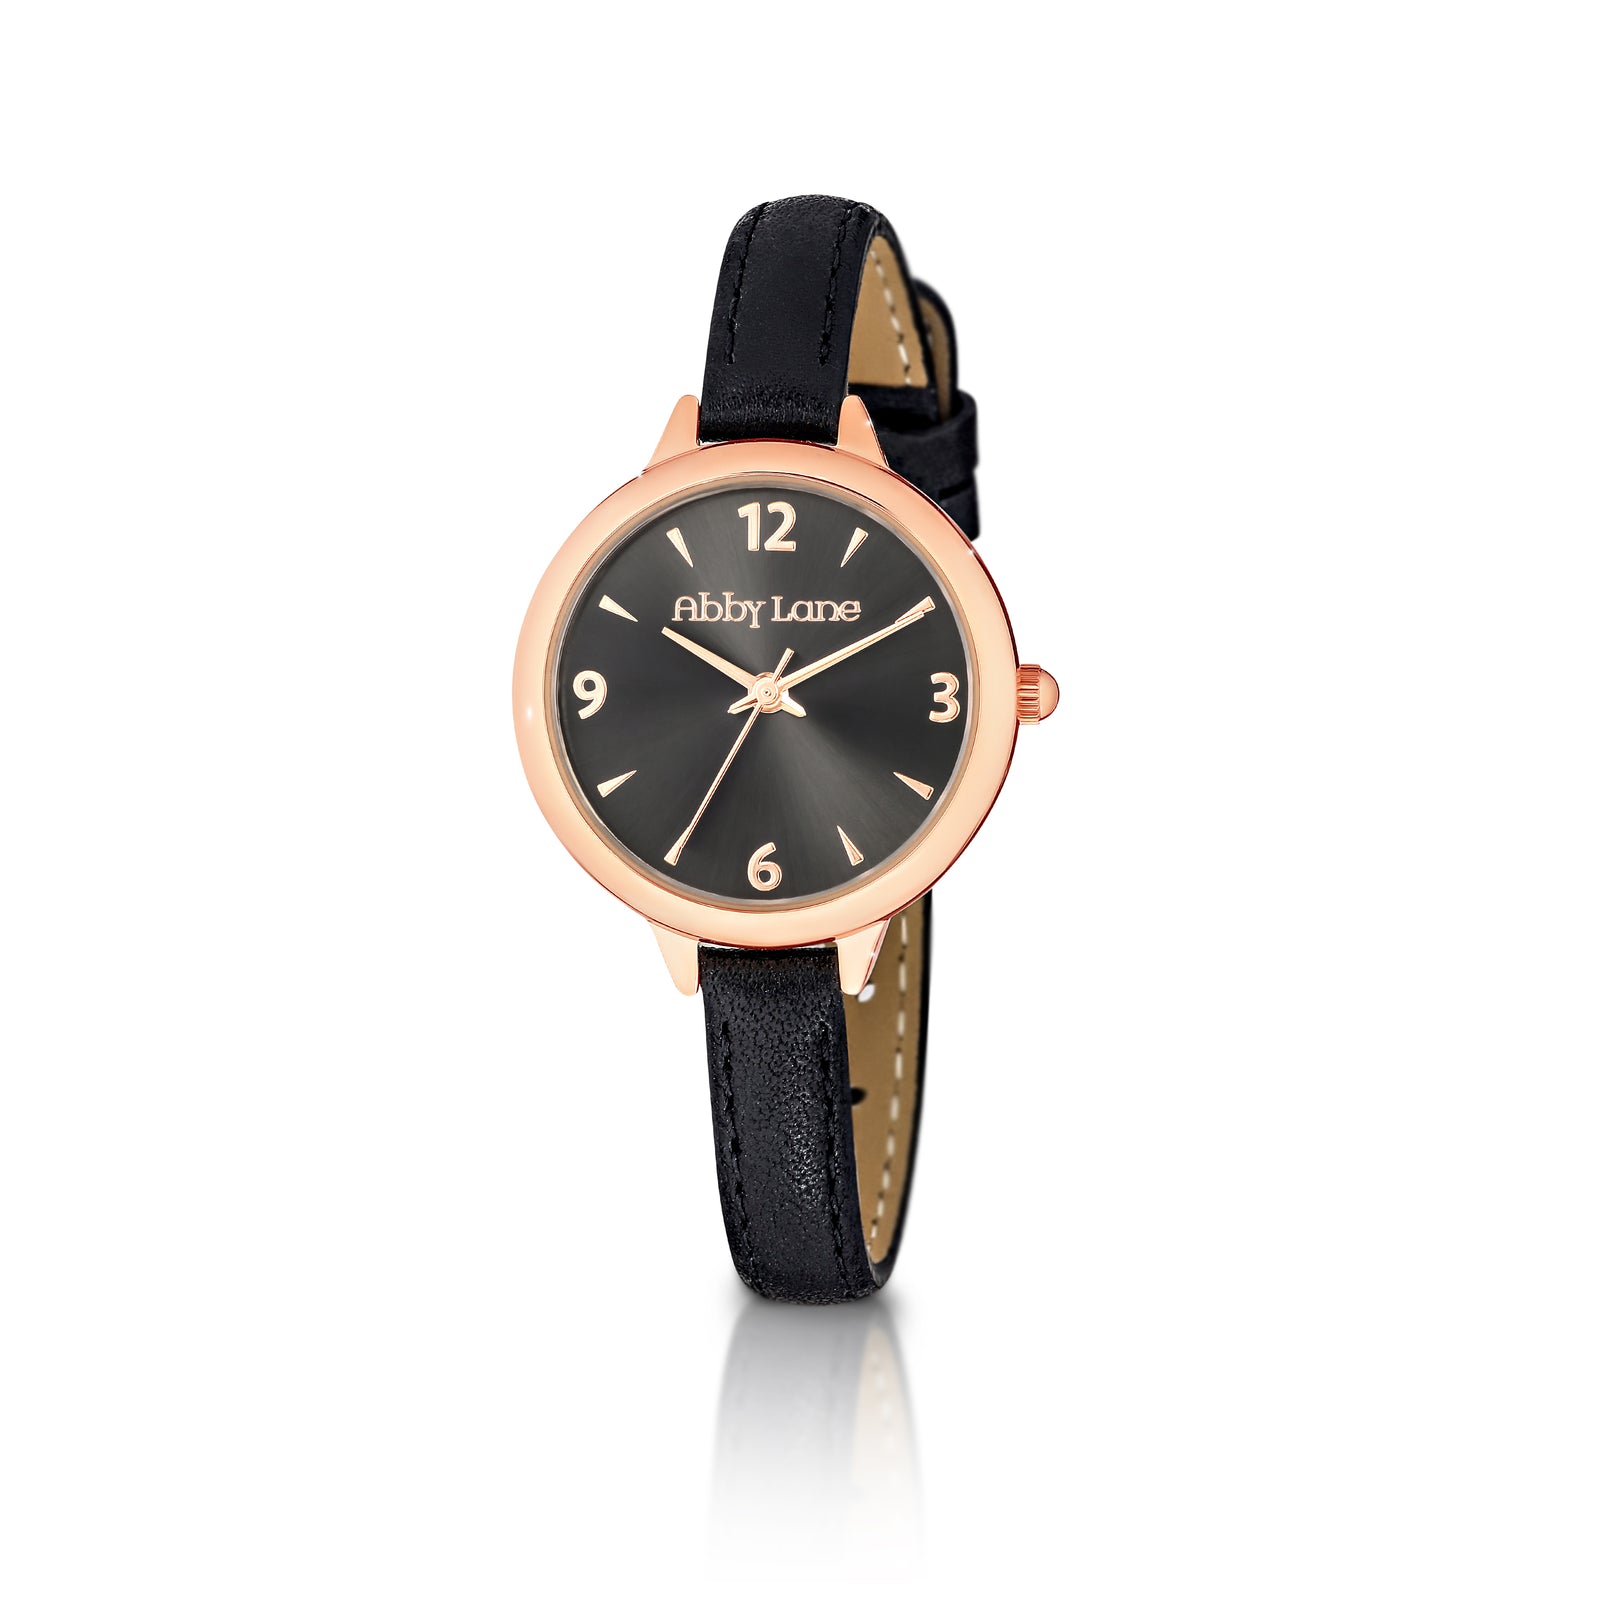 Abby Lane 'Charlotte' Collection Ladies Gold Watch Rose Goldtone Case with Black Dial and Rose Gold Accents